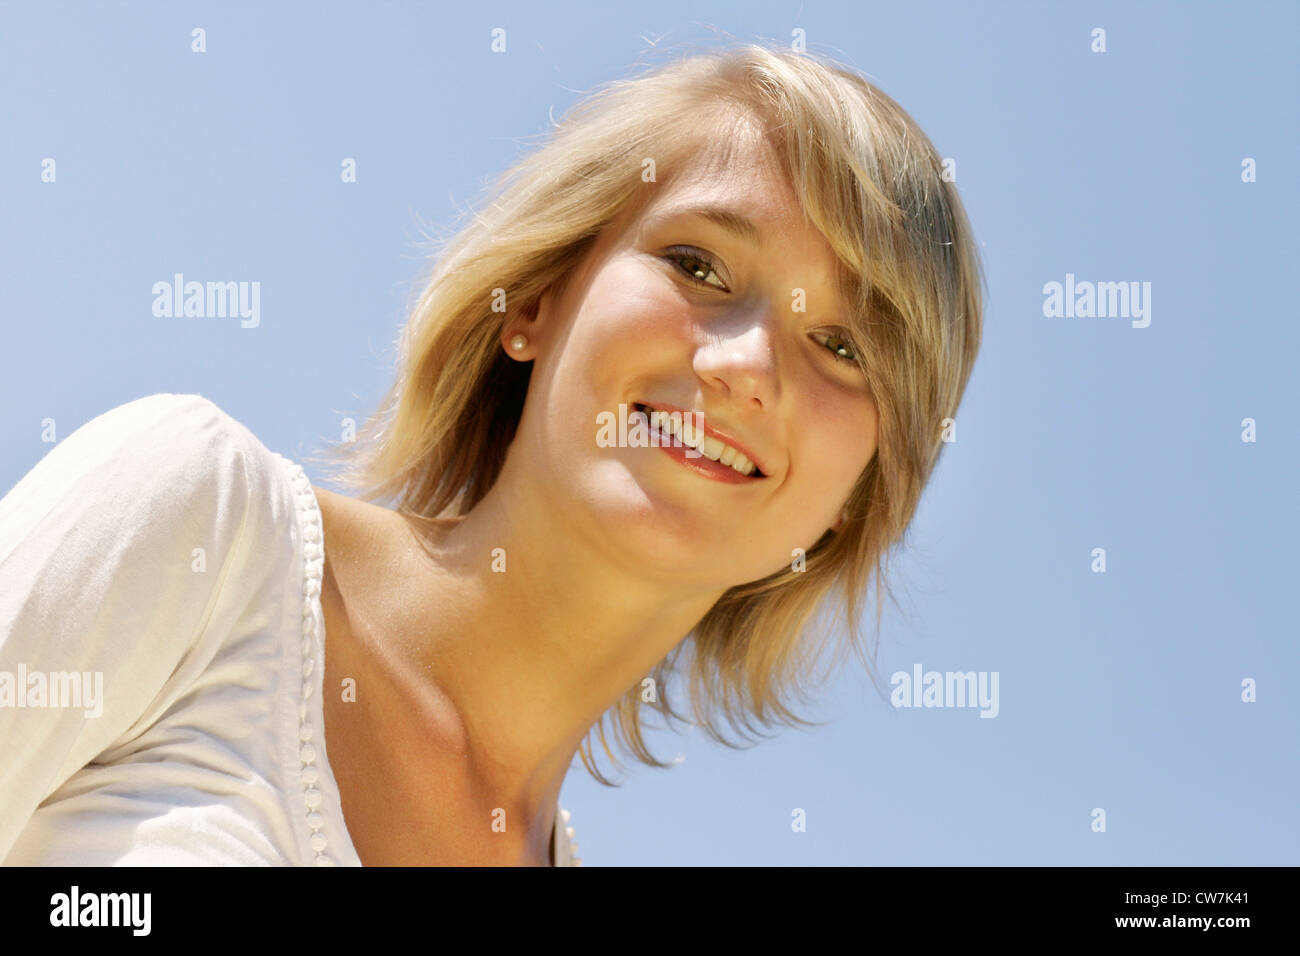 portrait of a blond woman in sunshine Stock Photo